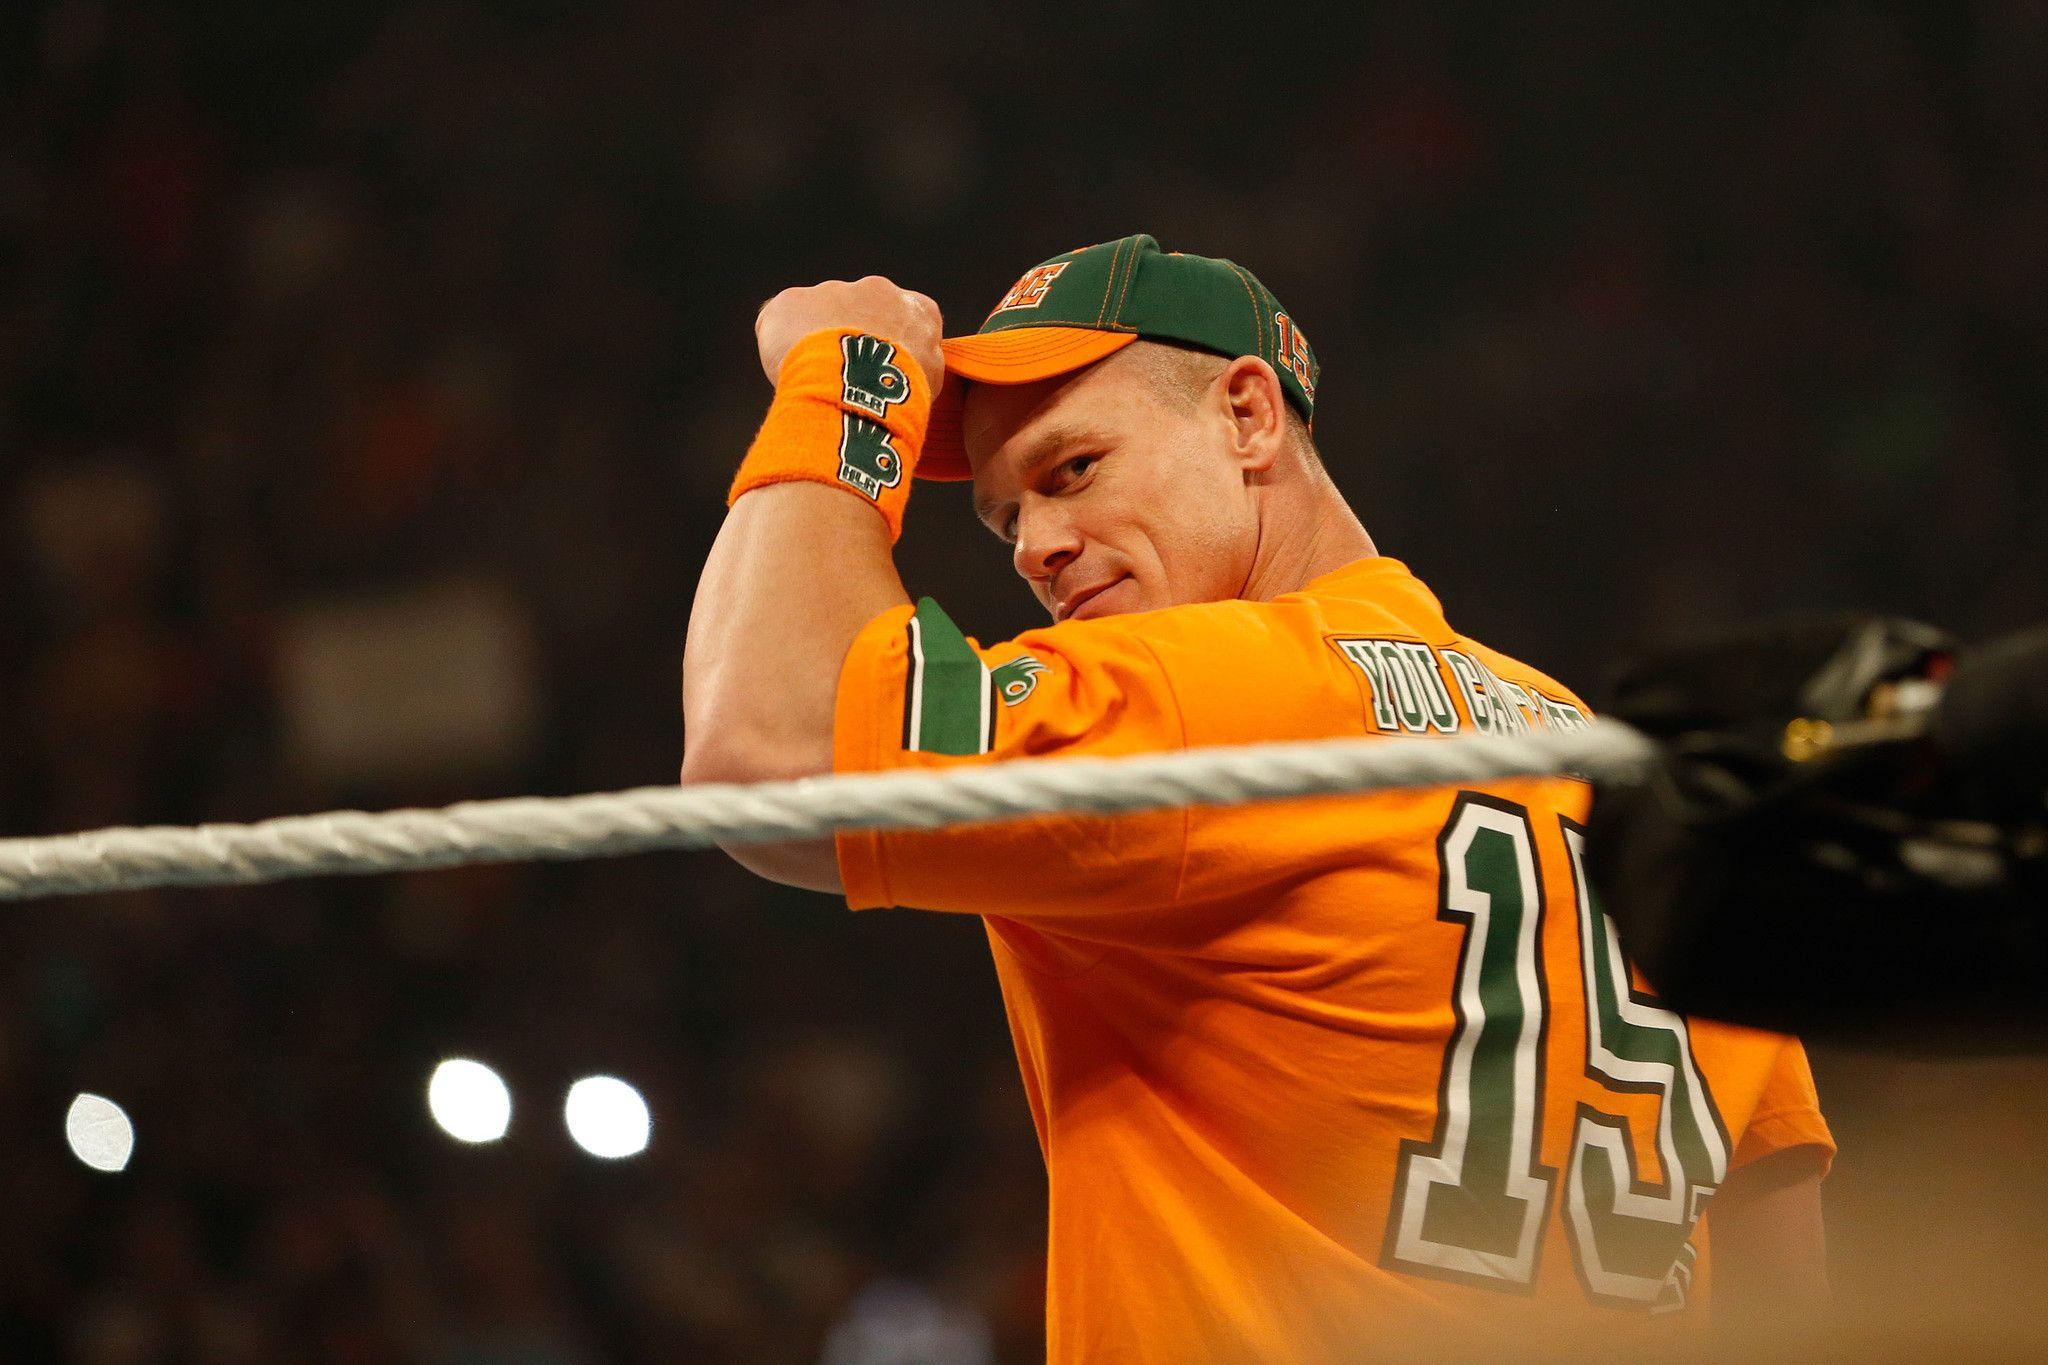 Ring Posts: John Cena to undergo shoulder surgery, likely to miss